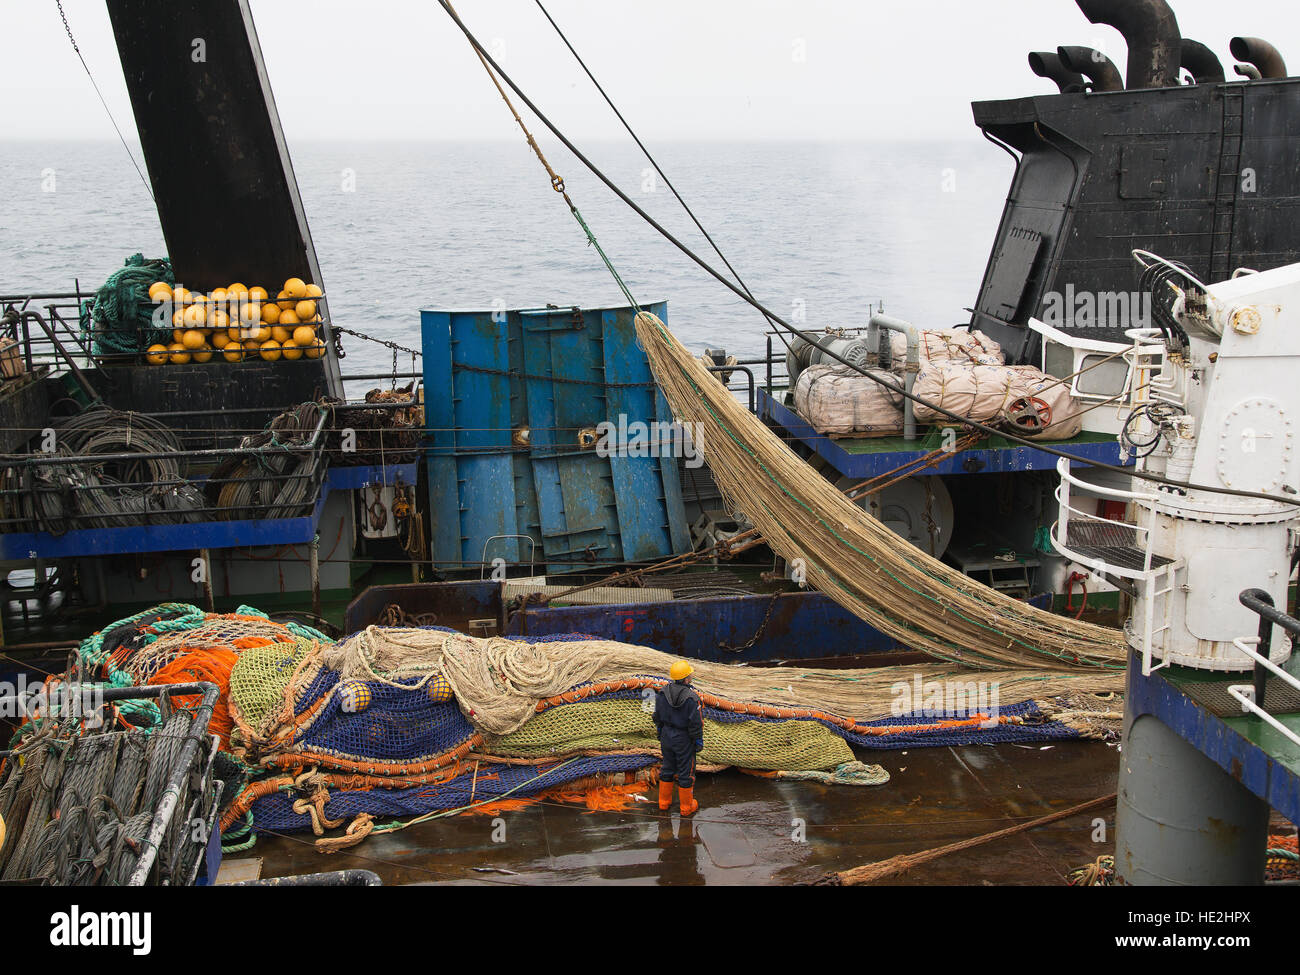 The Bering Sea, Russia - Jun 18th, 2016: The Bering Sea, seiner V. STARZHINSKY, the seaman to place a fishing net on a deck. Stock Photo